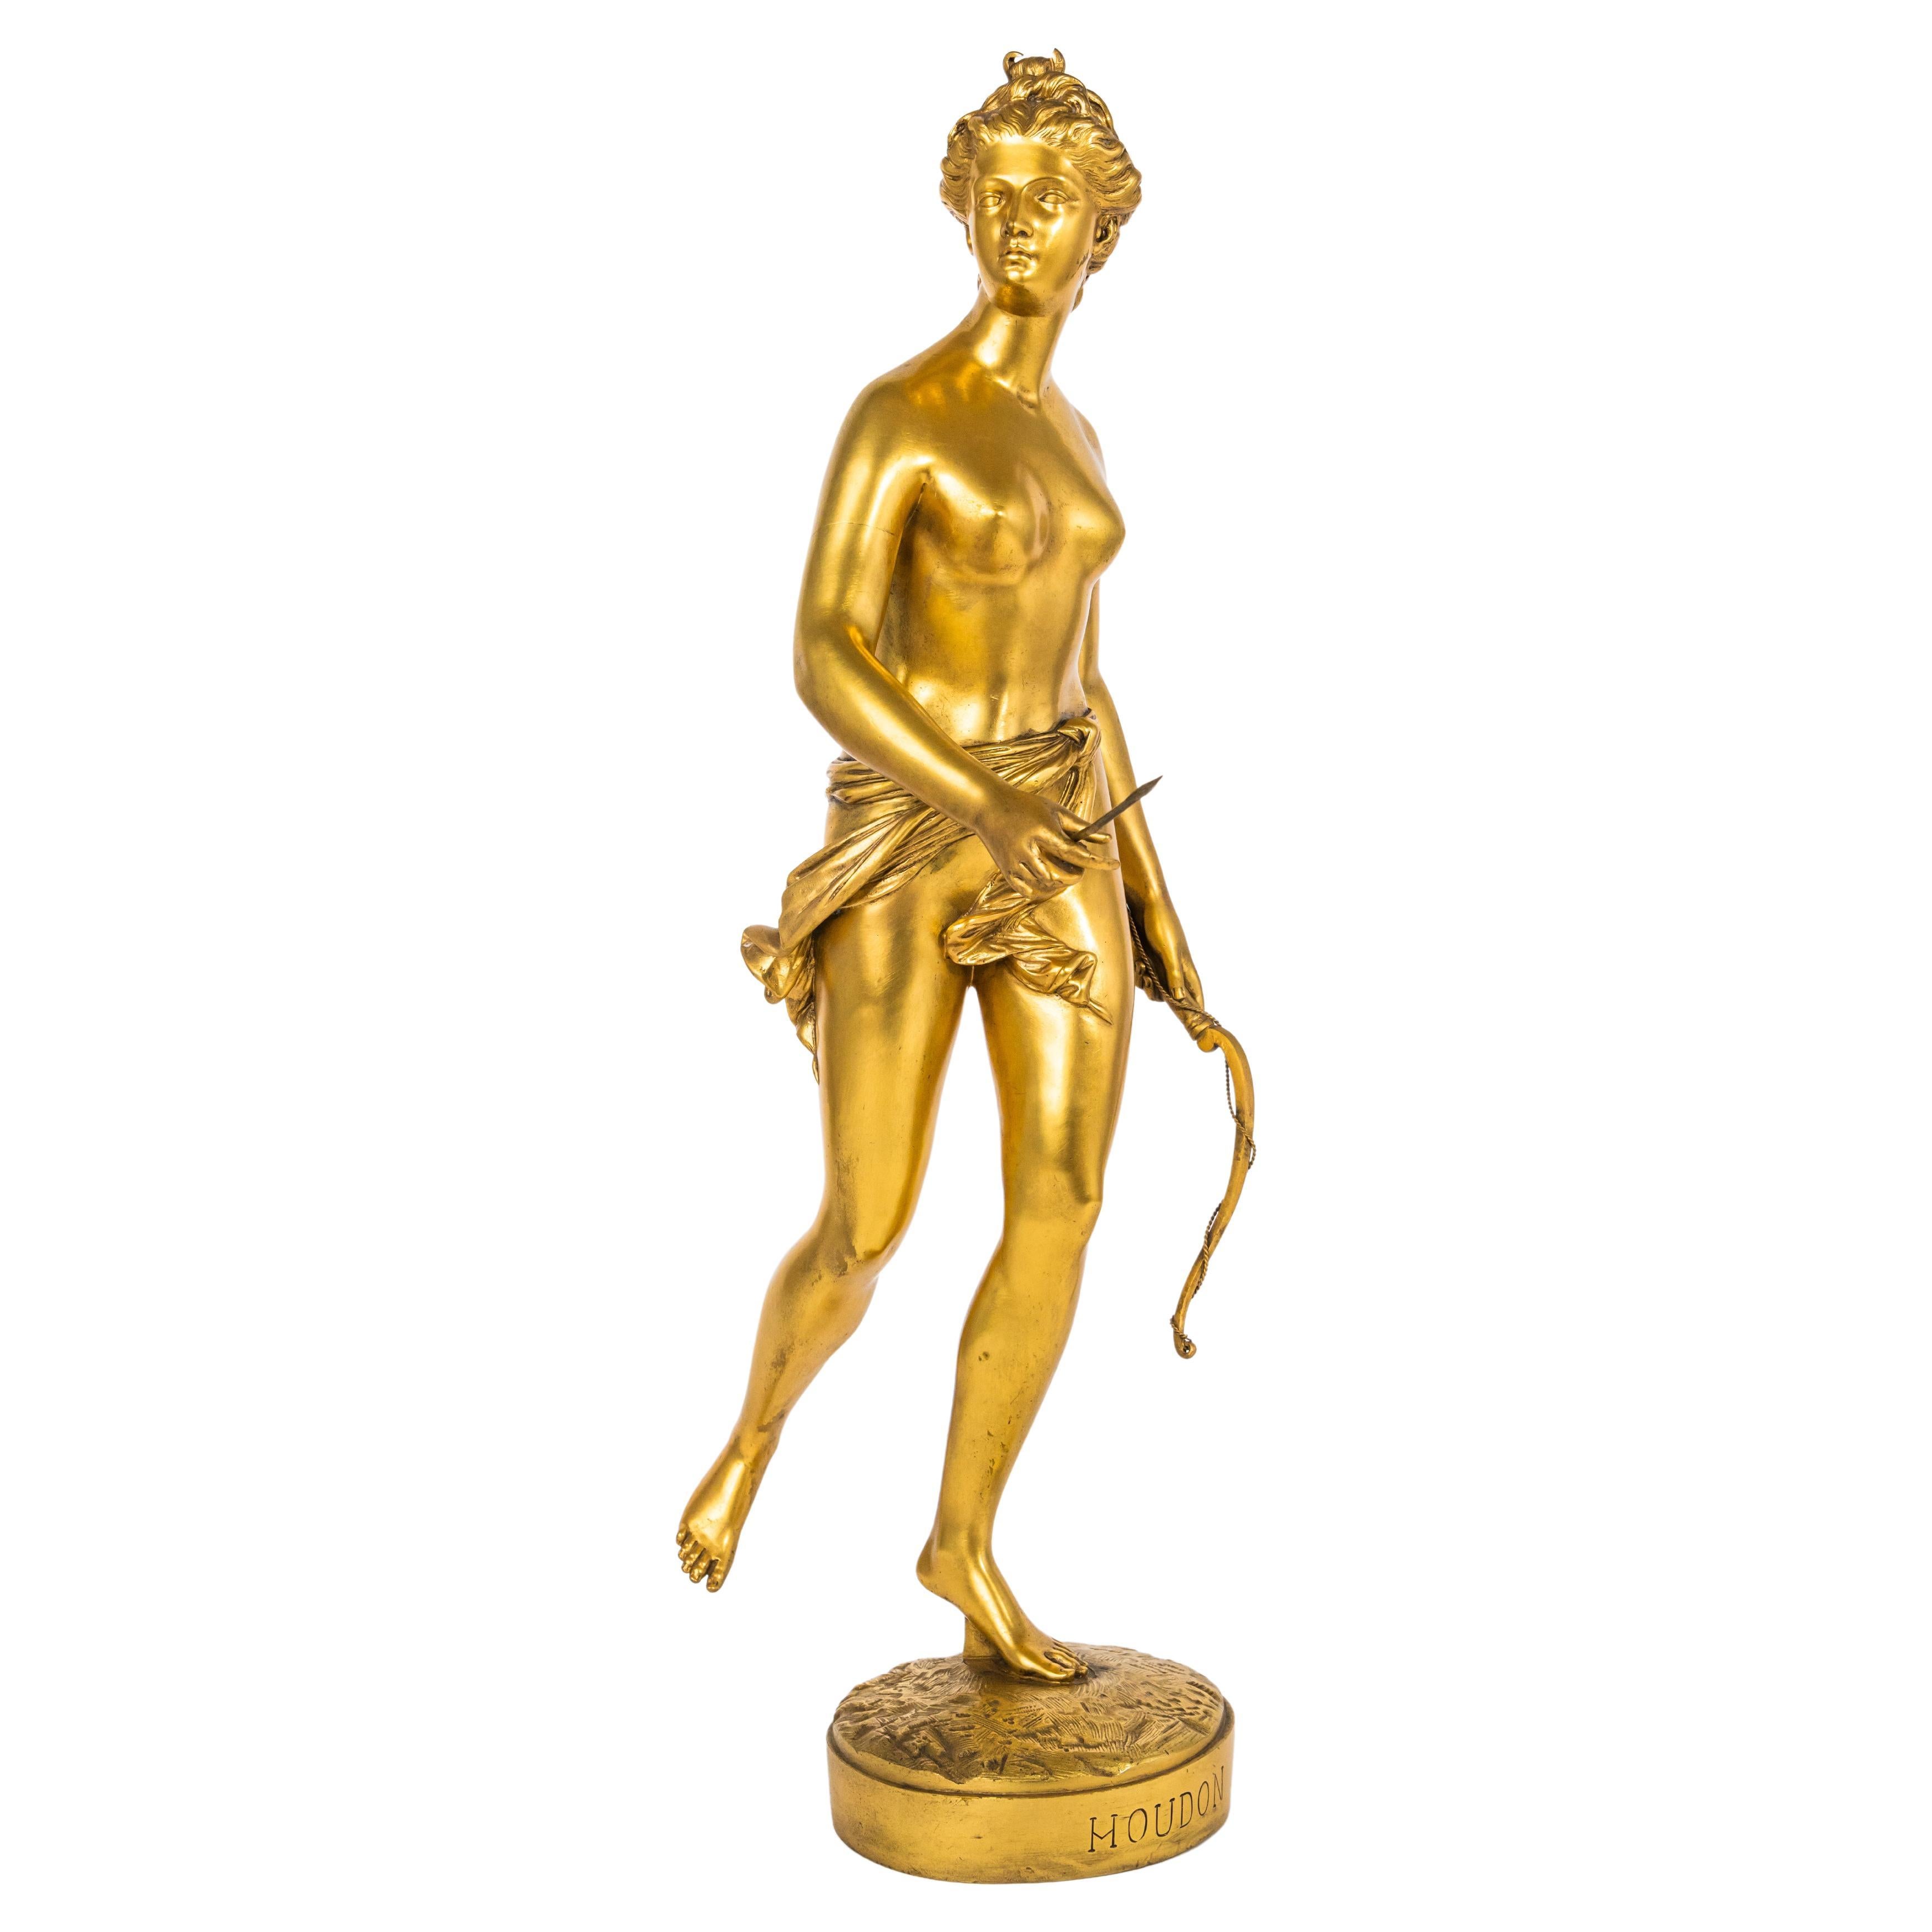 19th Century French Gilt Bronze Sculpture of Diana the Huntress